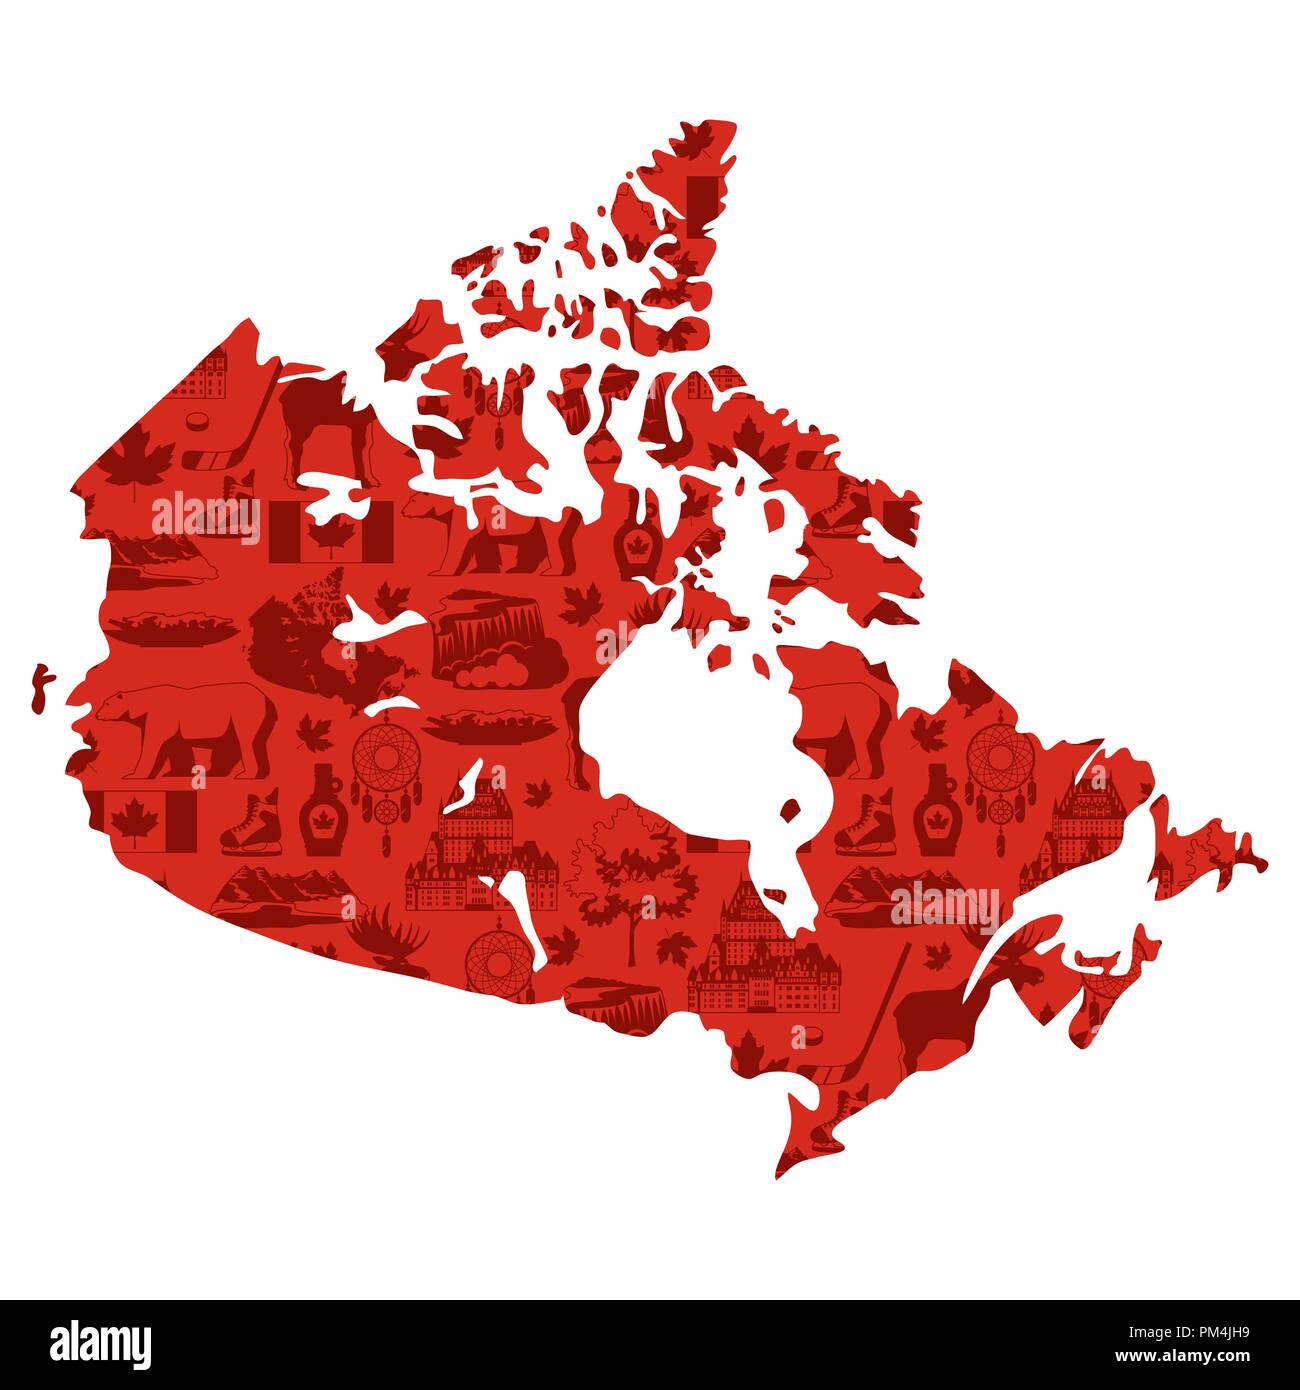 Illustration of Canada map. Stock Vector